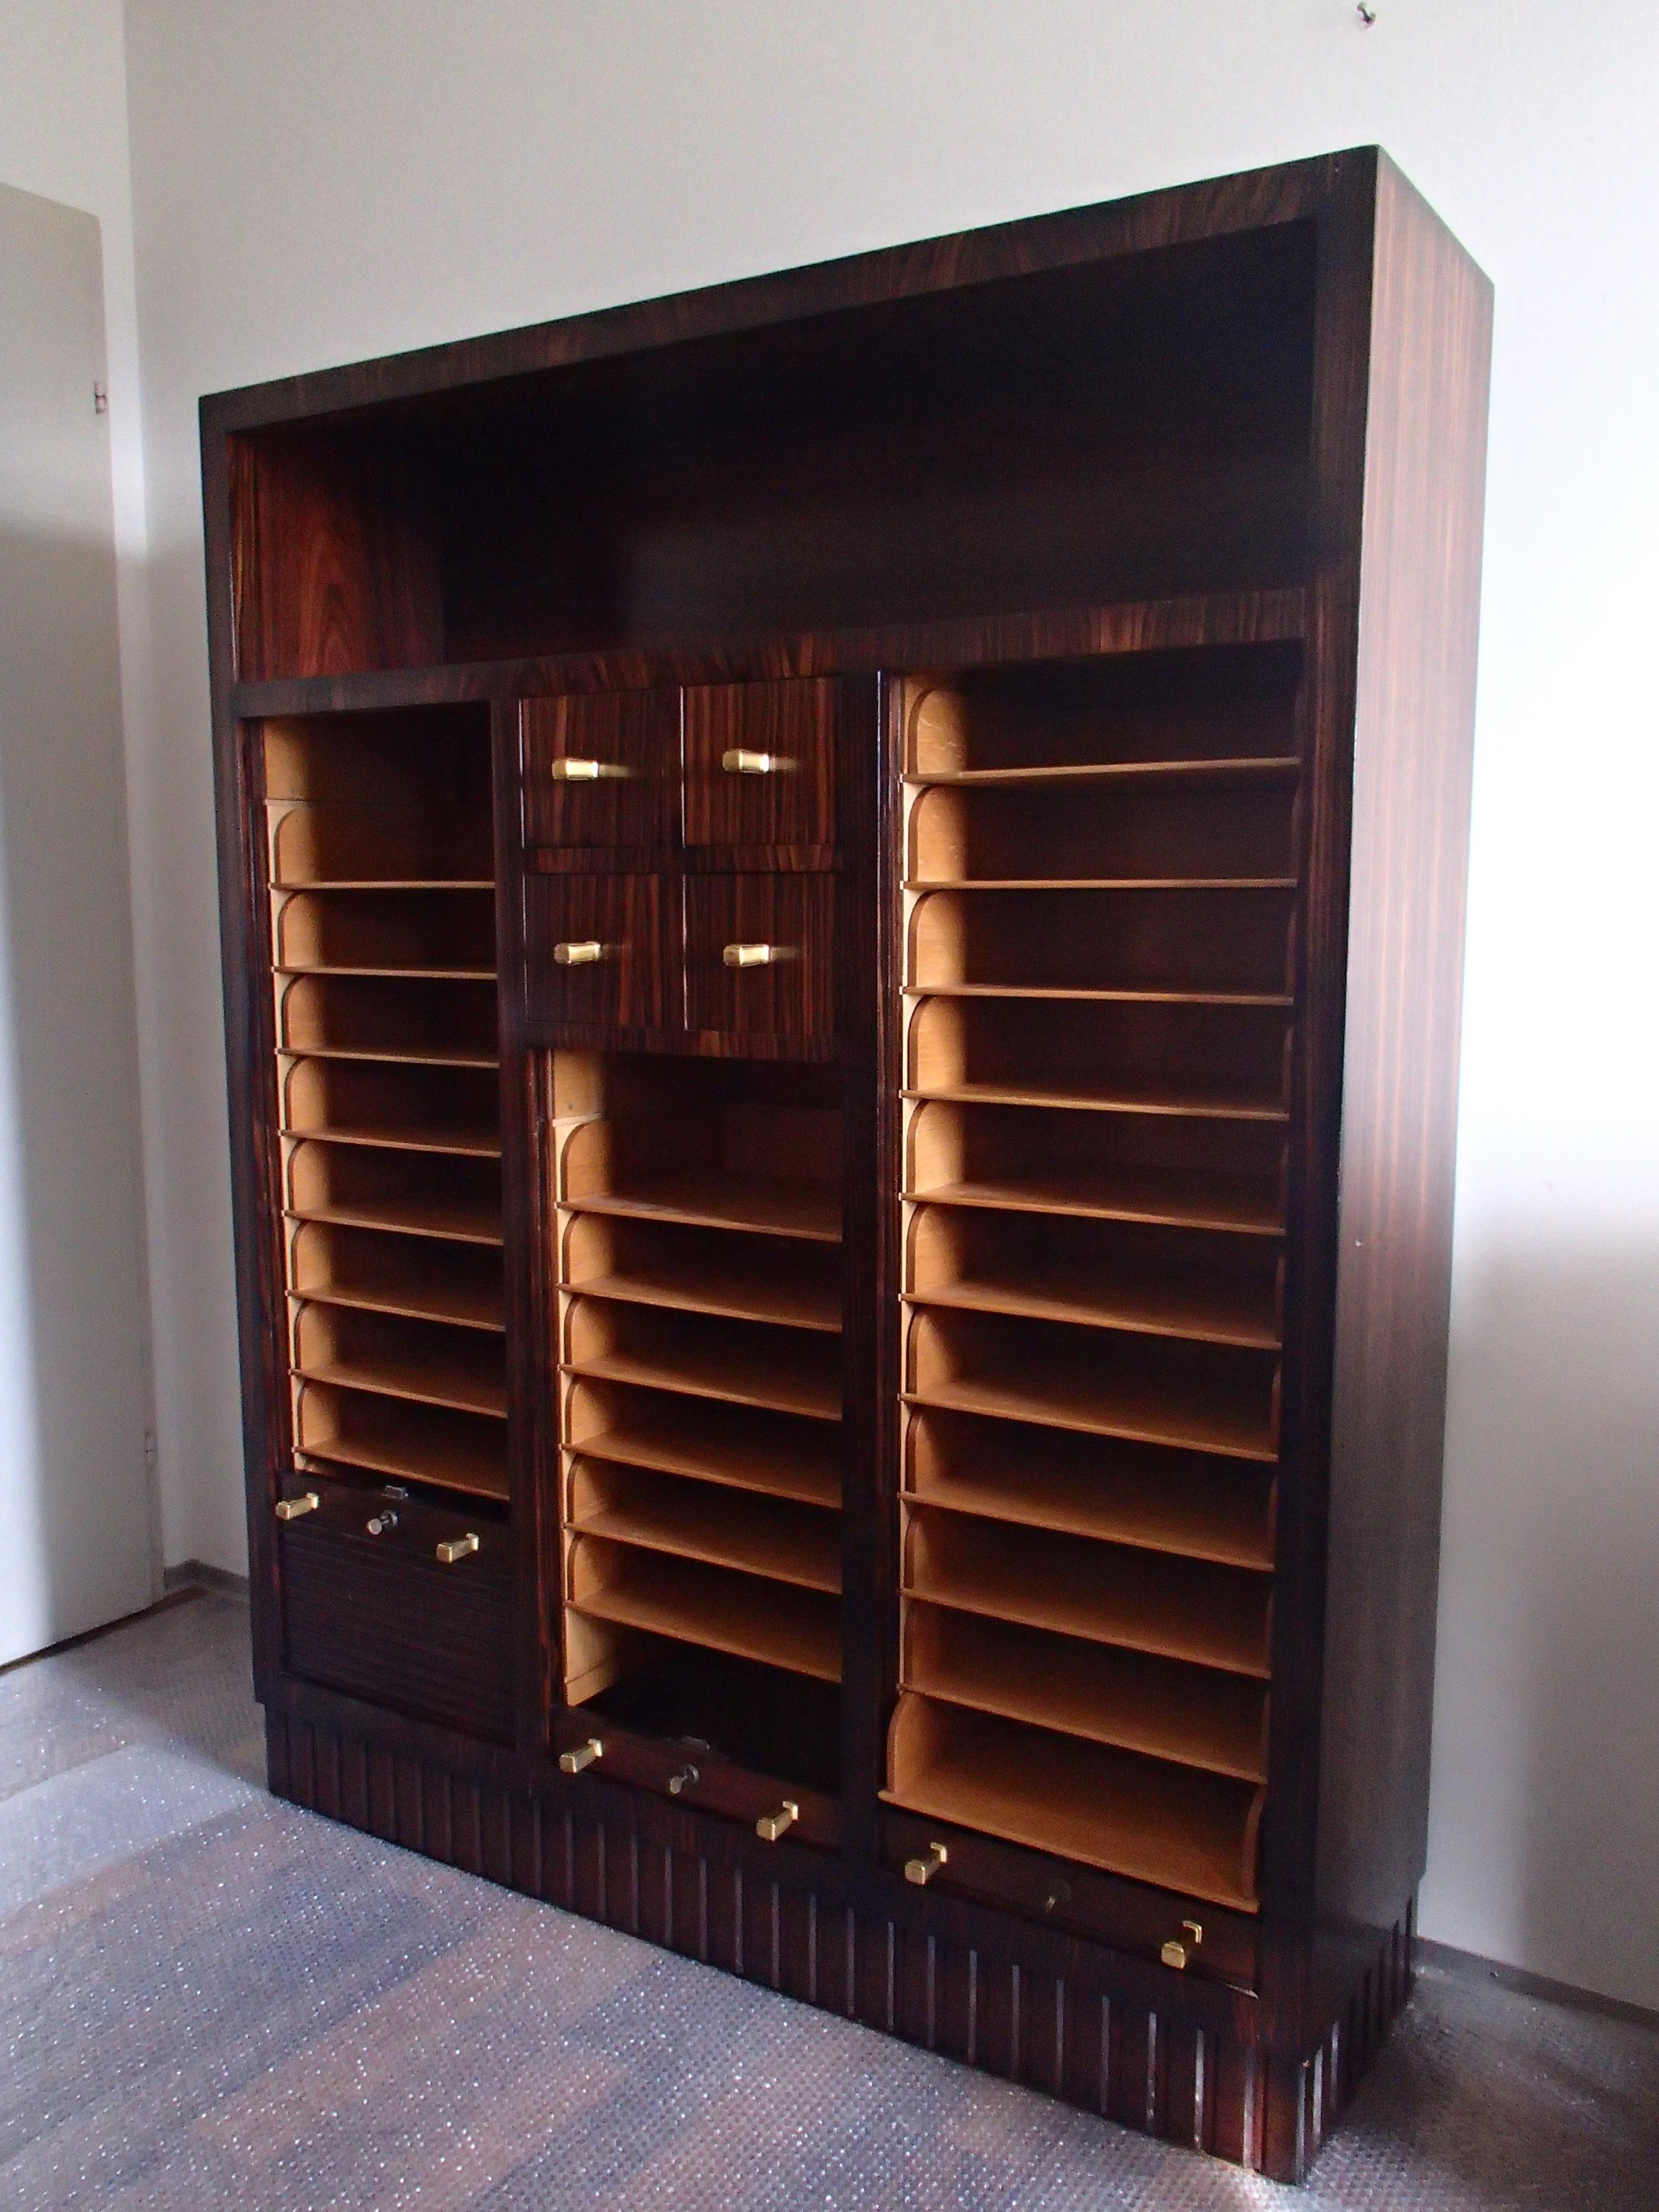 Modern Art Deco cabinet with 27 oak drawers where you may put A4 papaers or folders.
The 4 small drawers are perfect for CD's.
 